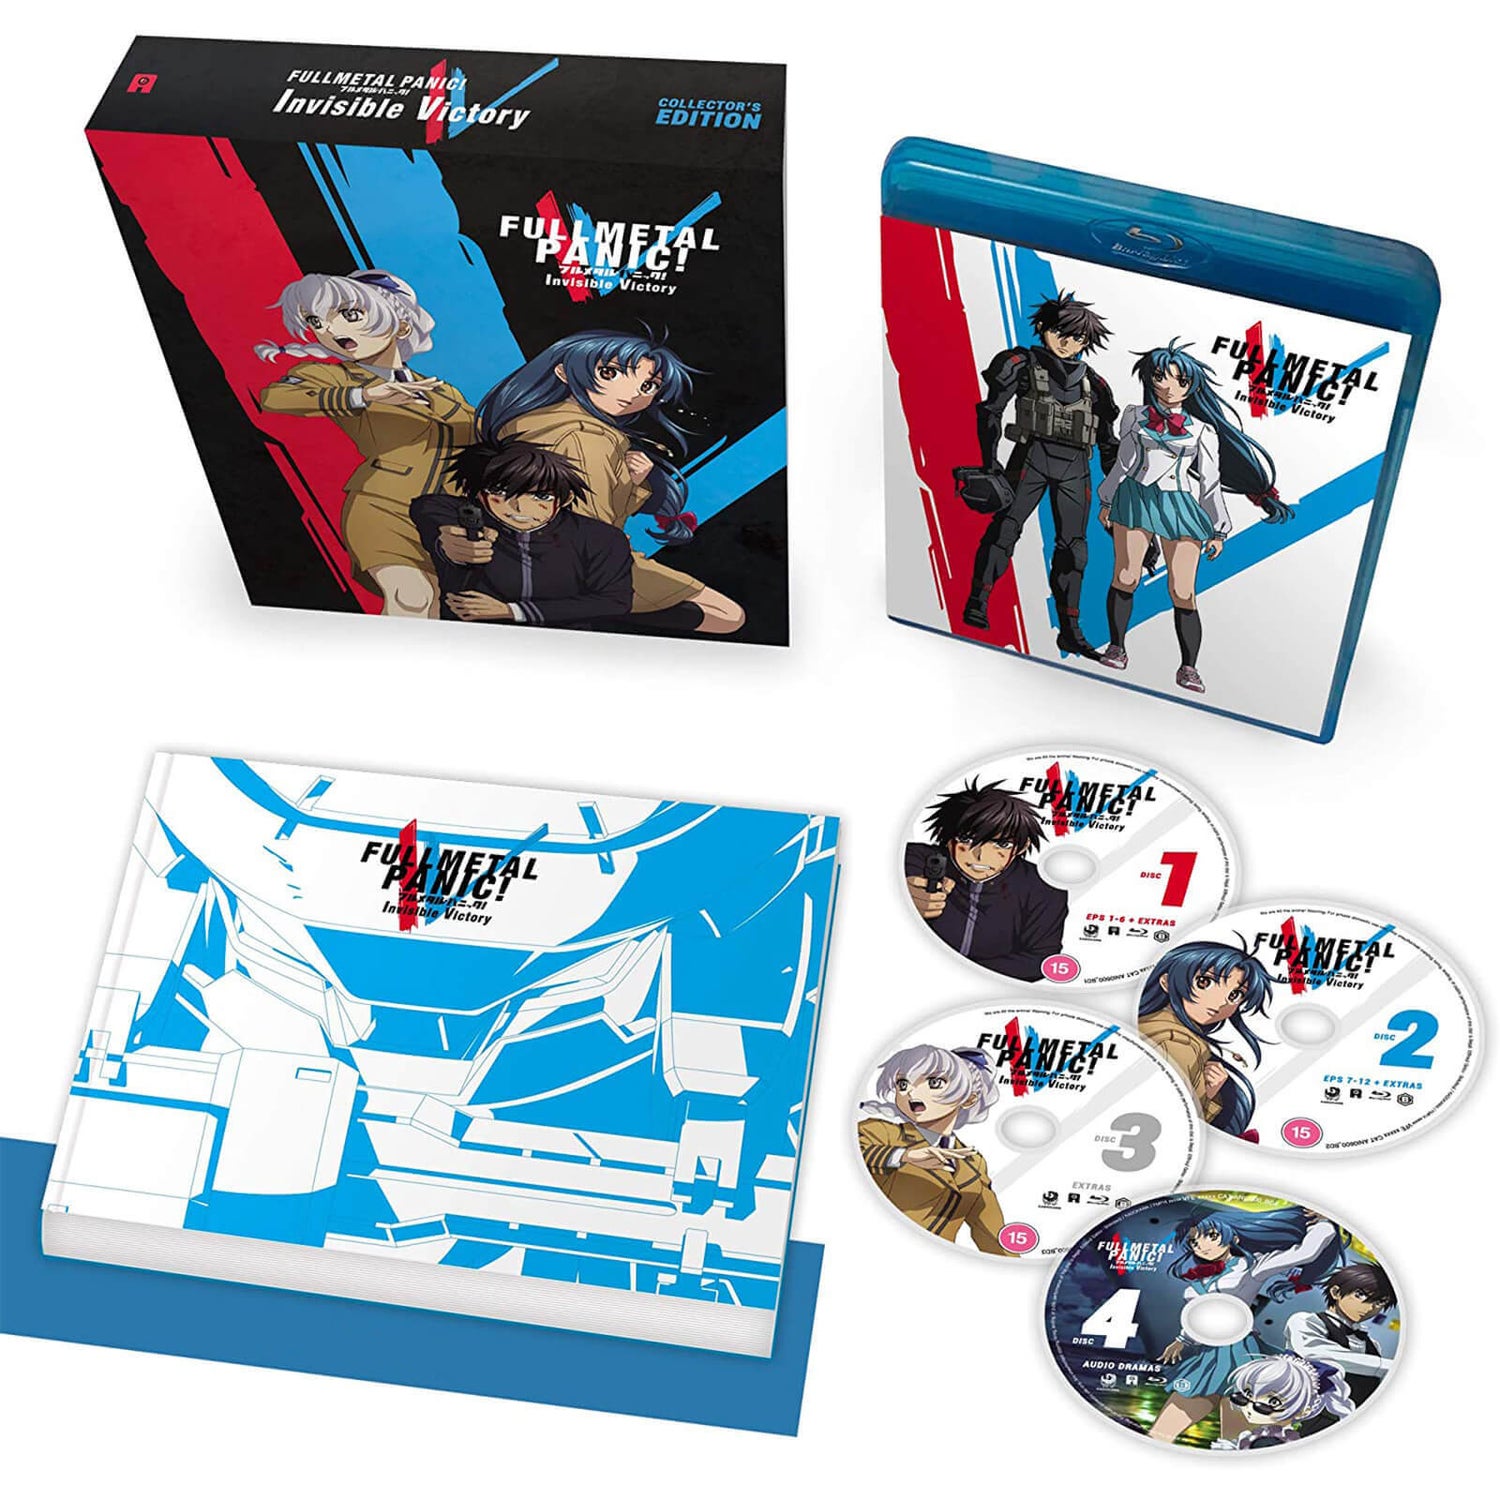 Full Metal Panic! Invisible Victory - Collector's Edition